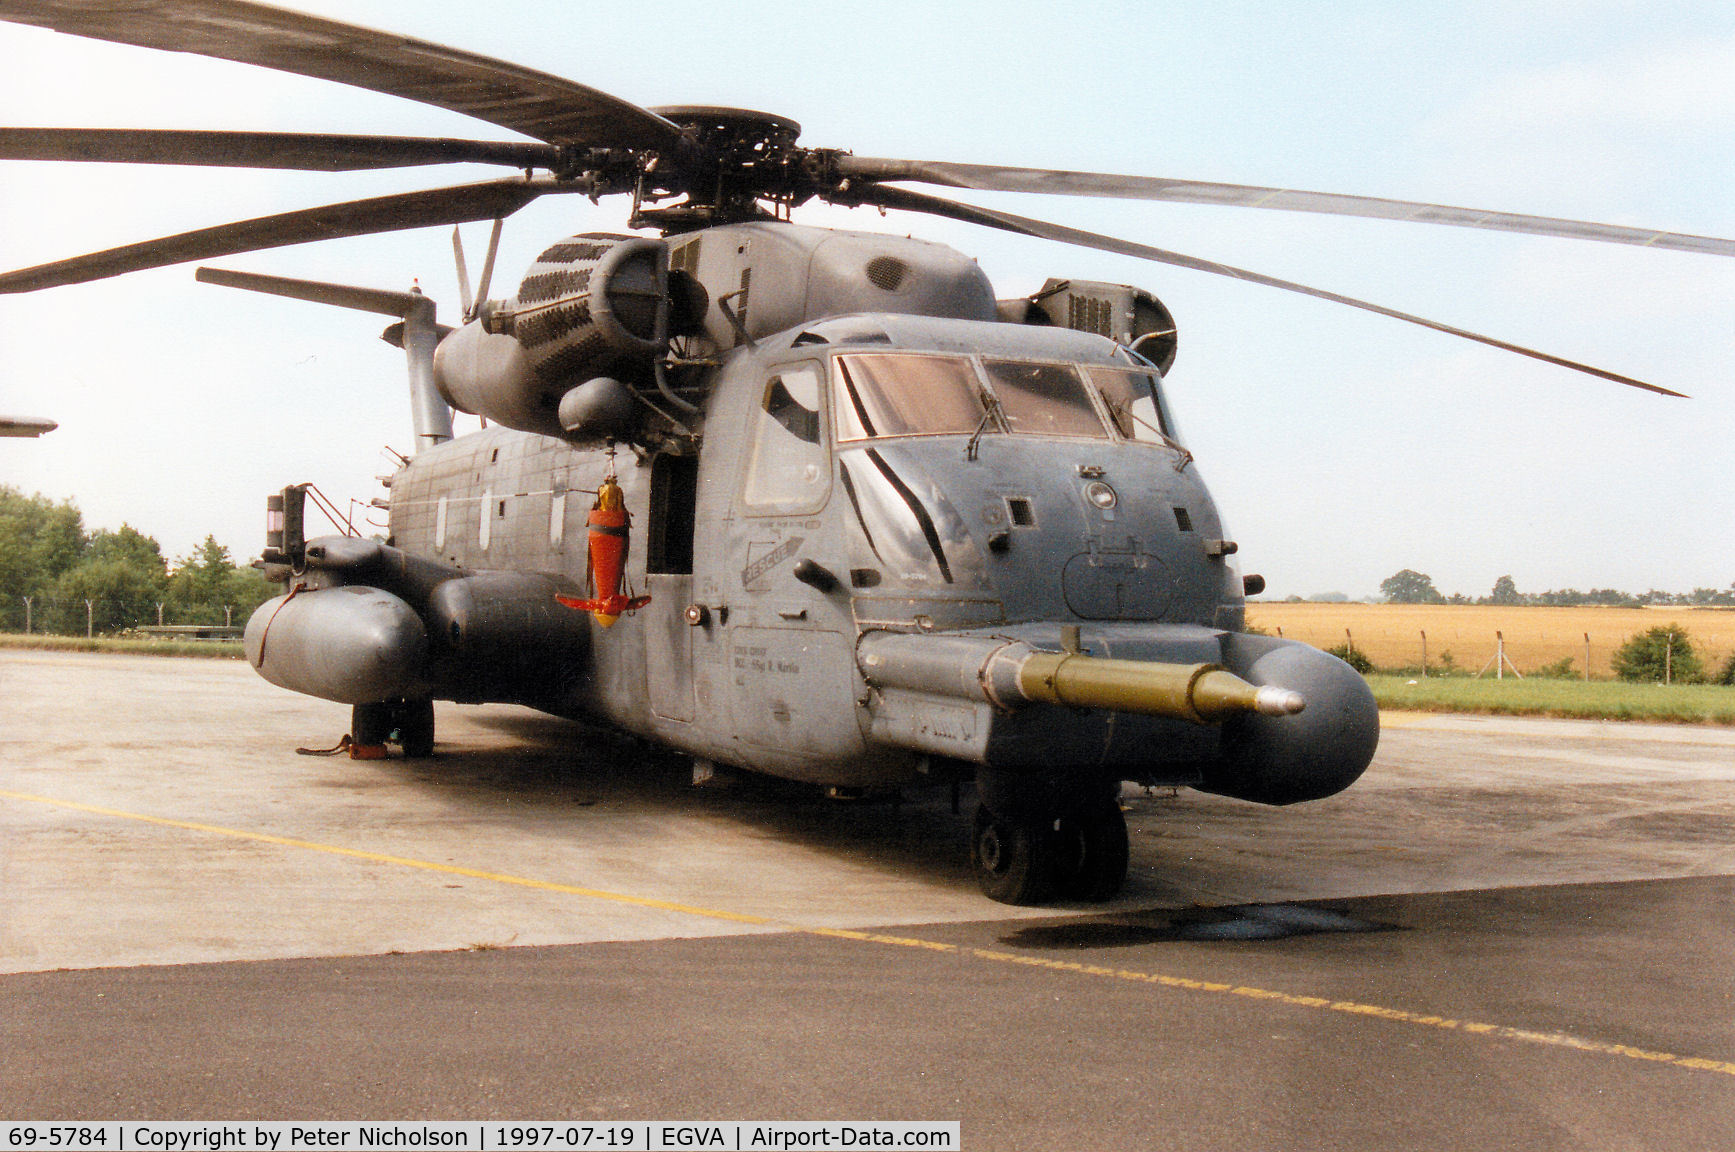 69-5784, 1969 Sikorsky MH-53J Pave Low III C/N 65-232, Another view of the 21st Special Operations Squadron Pave Low III on display at the 1997 Intnl Air Tattoo at RAF Fairford.